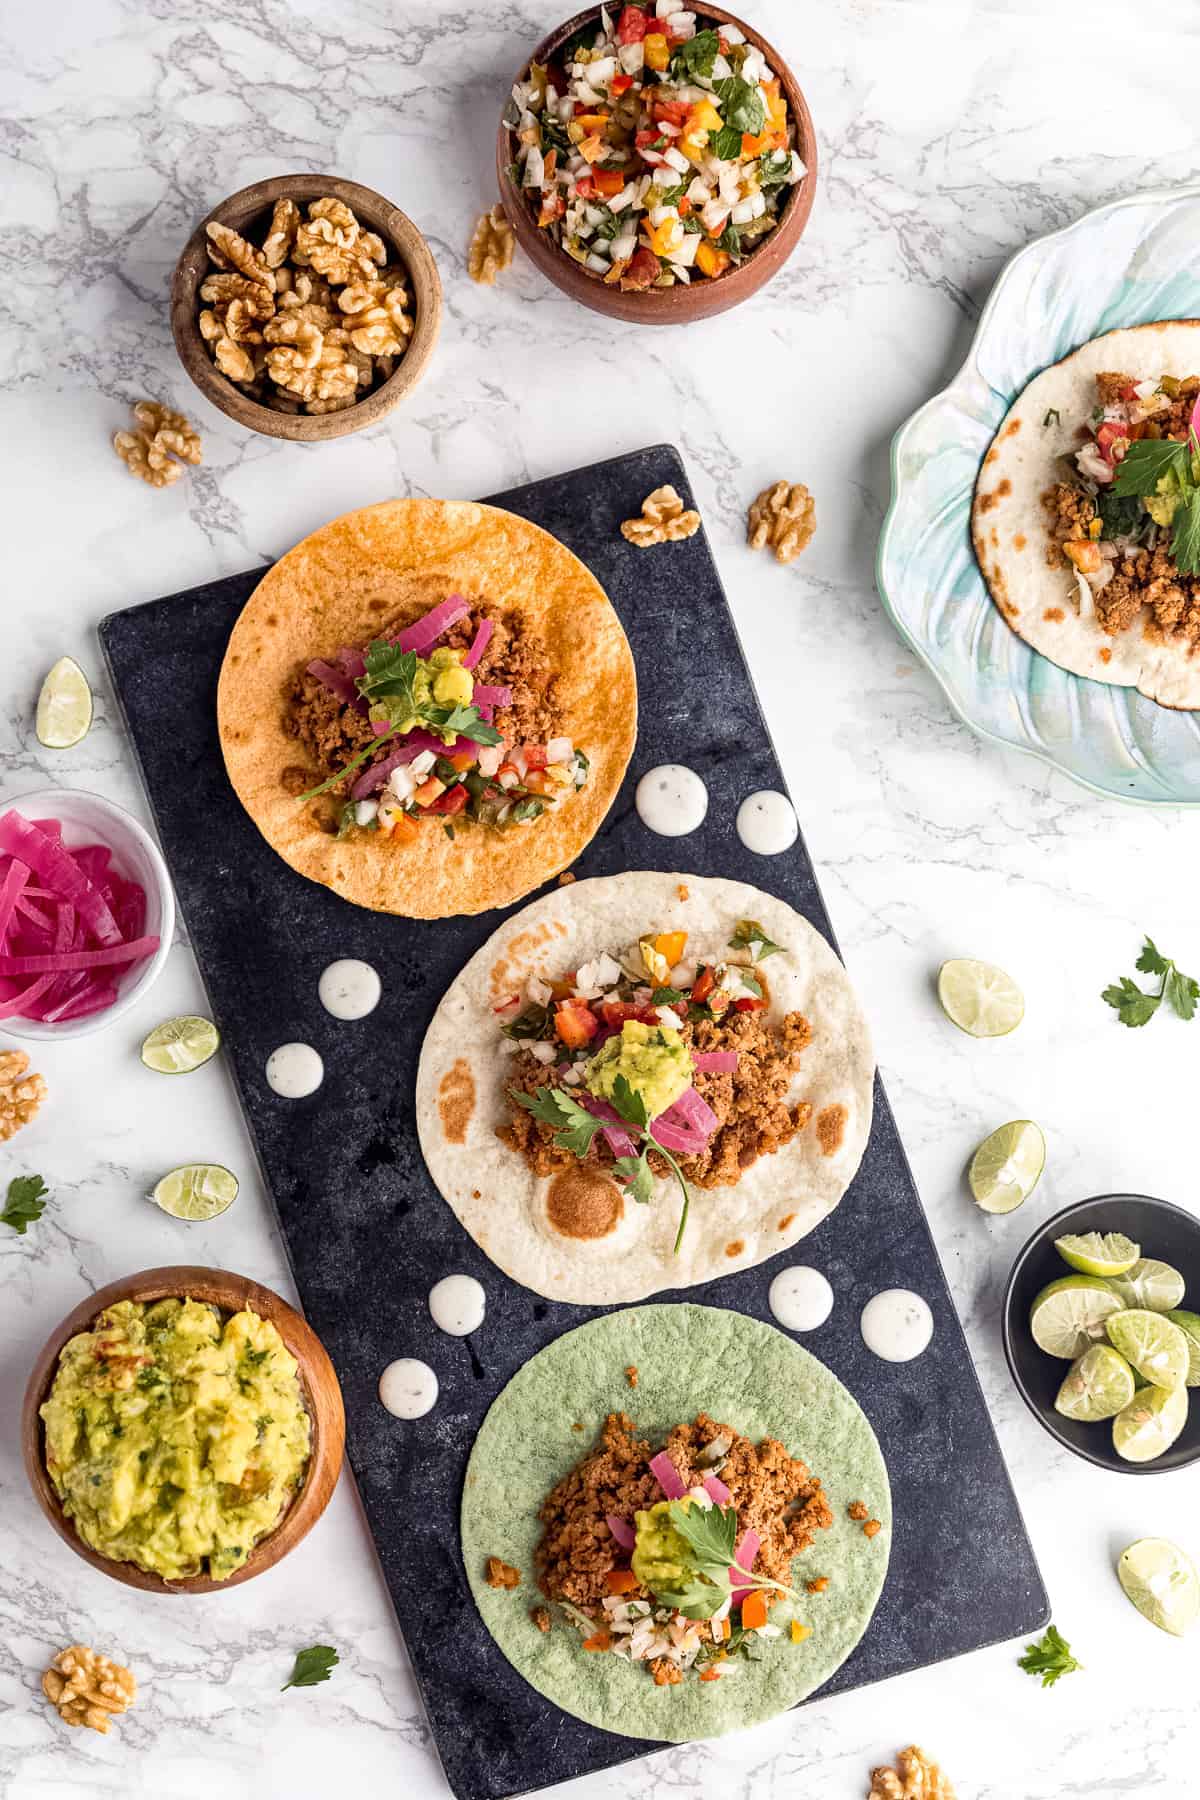 Ground walnut tacos with toppings.